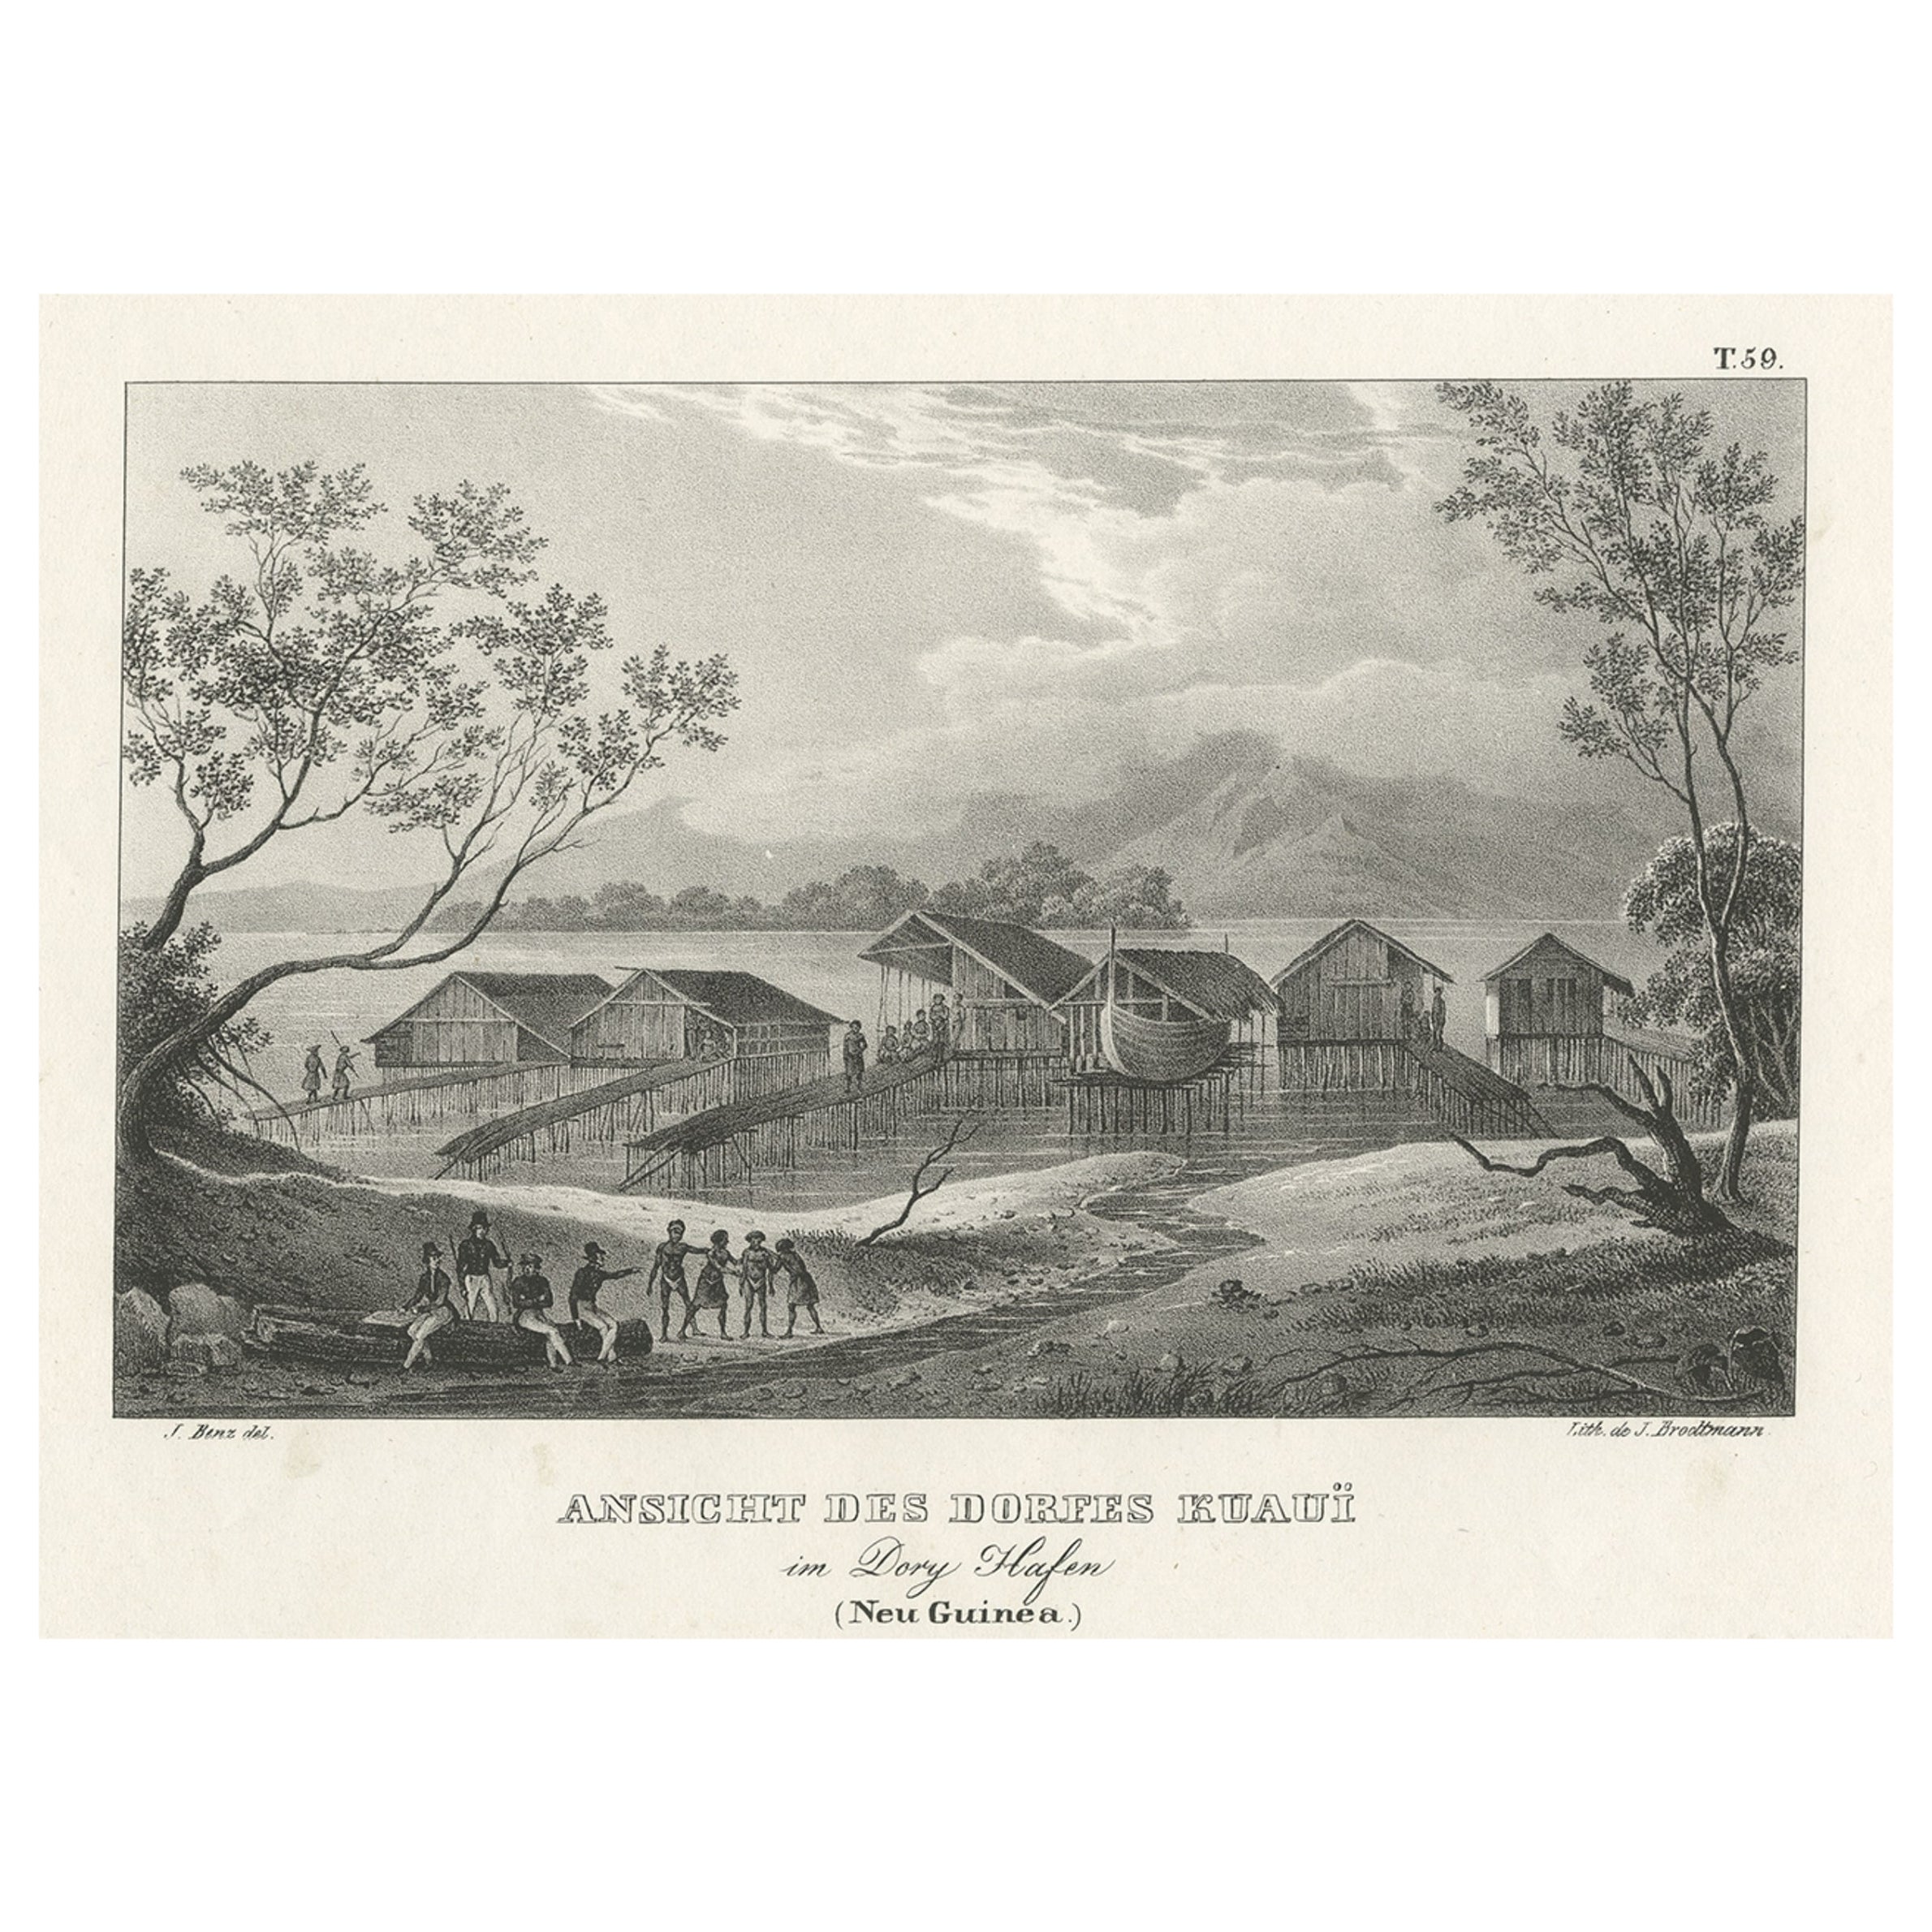 Original Lithograph with a Scene of a Village and Harbour in New Guinea, c.1836